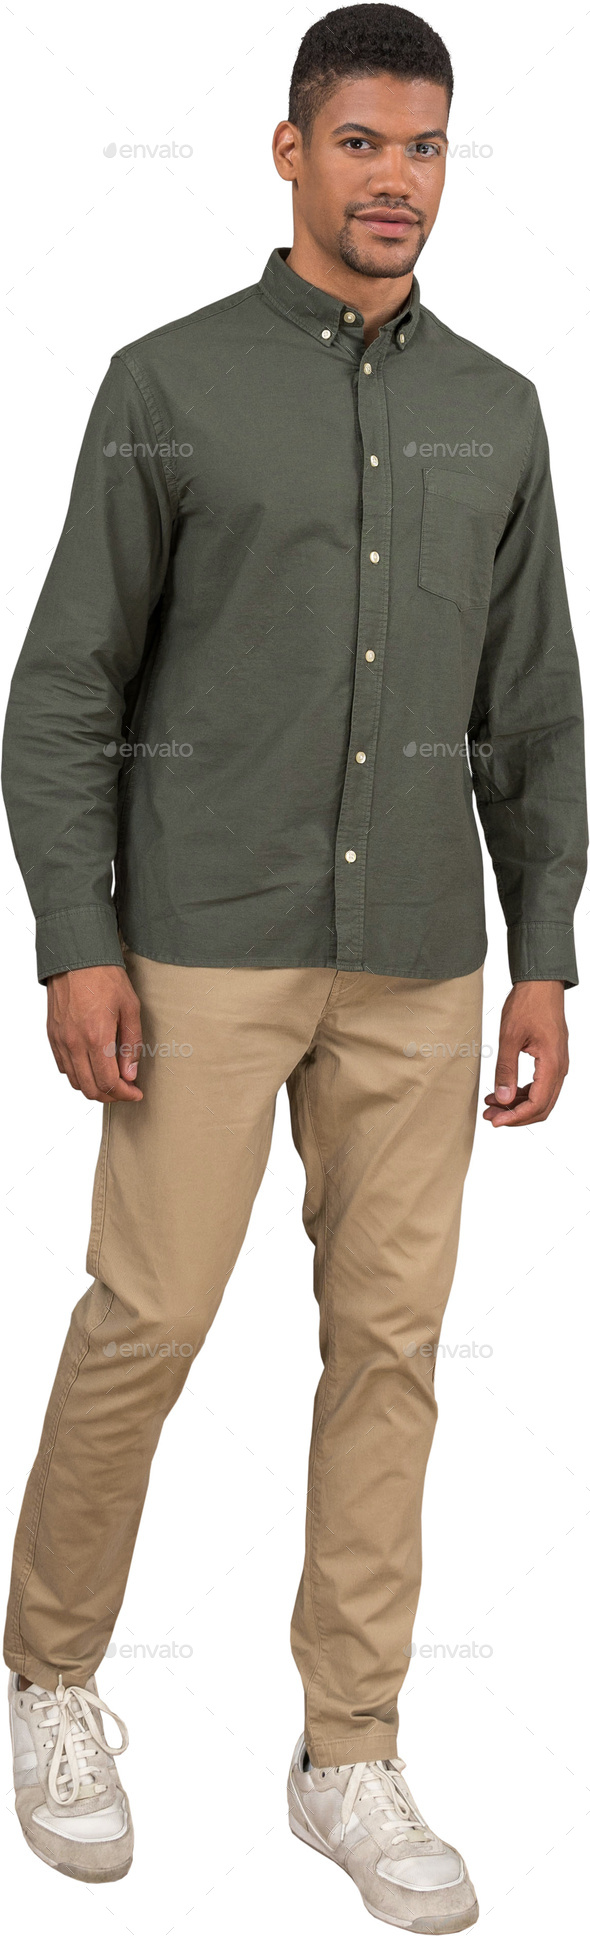 Buy Olive Green Trousers & Pants for Men by iVOC Online | Ajio.com